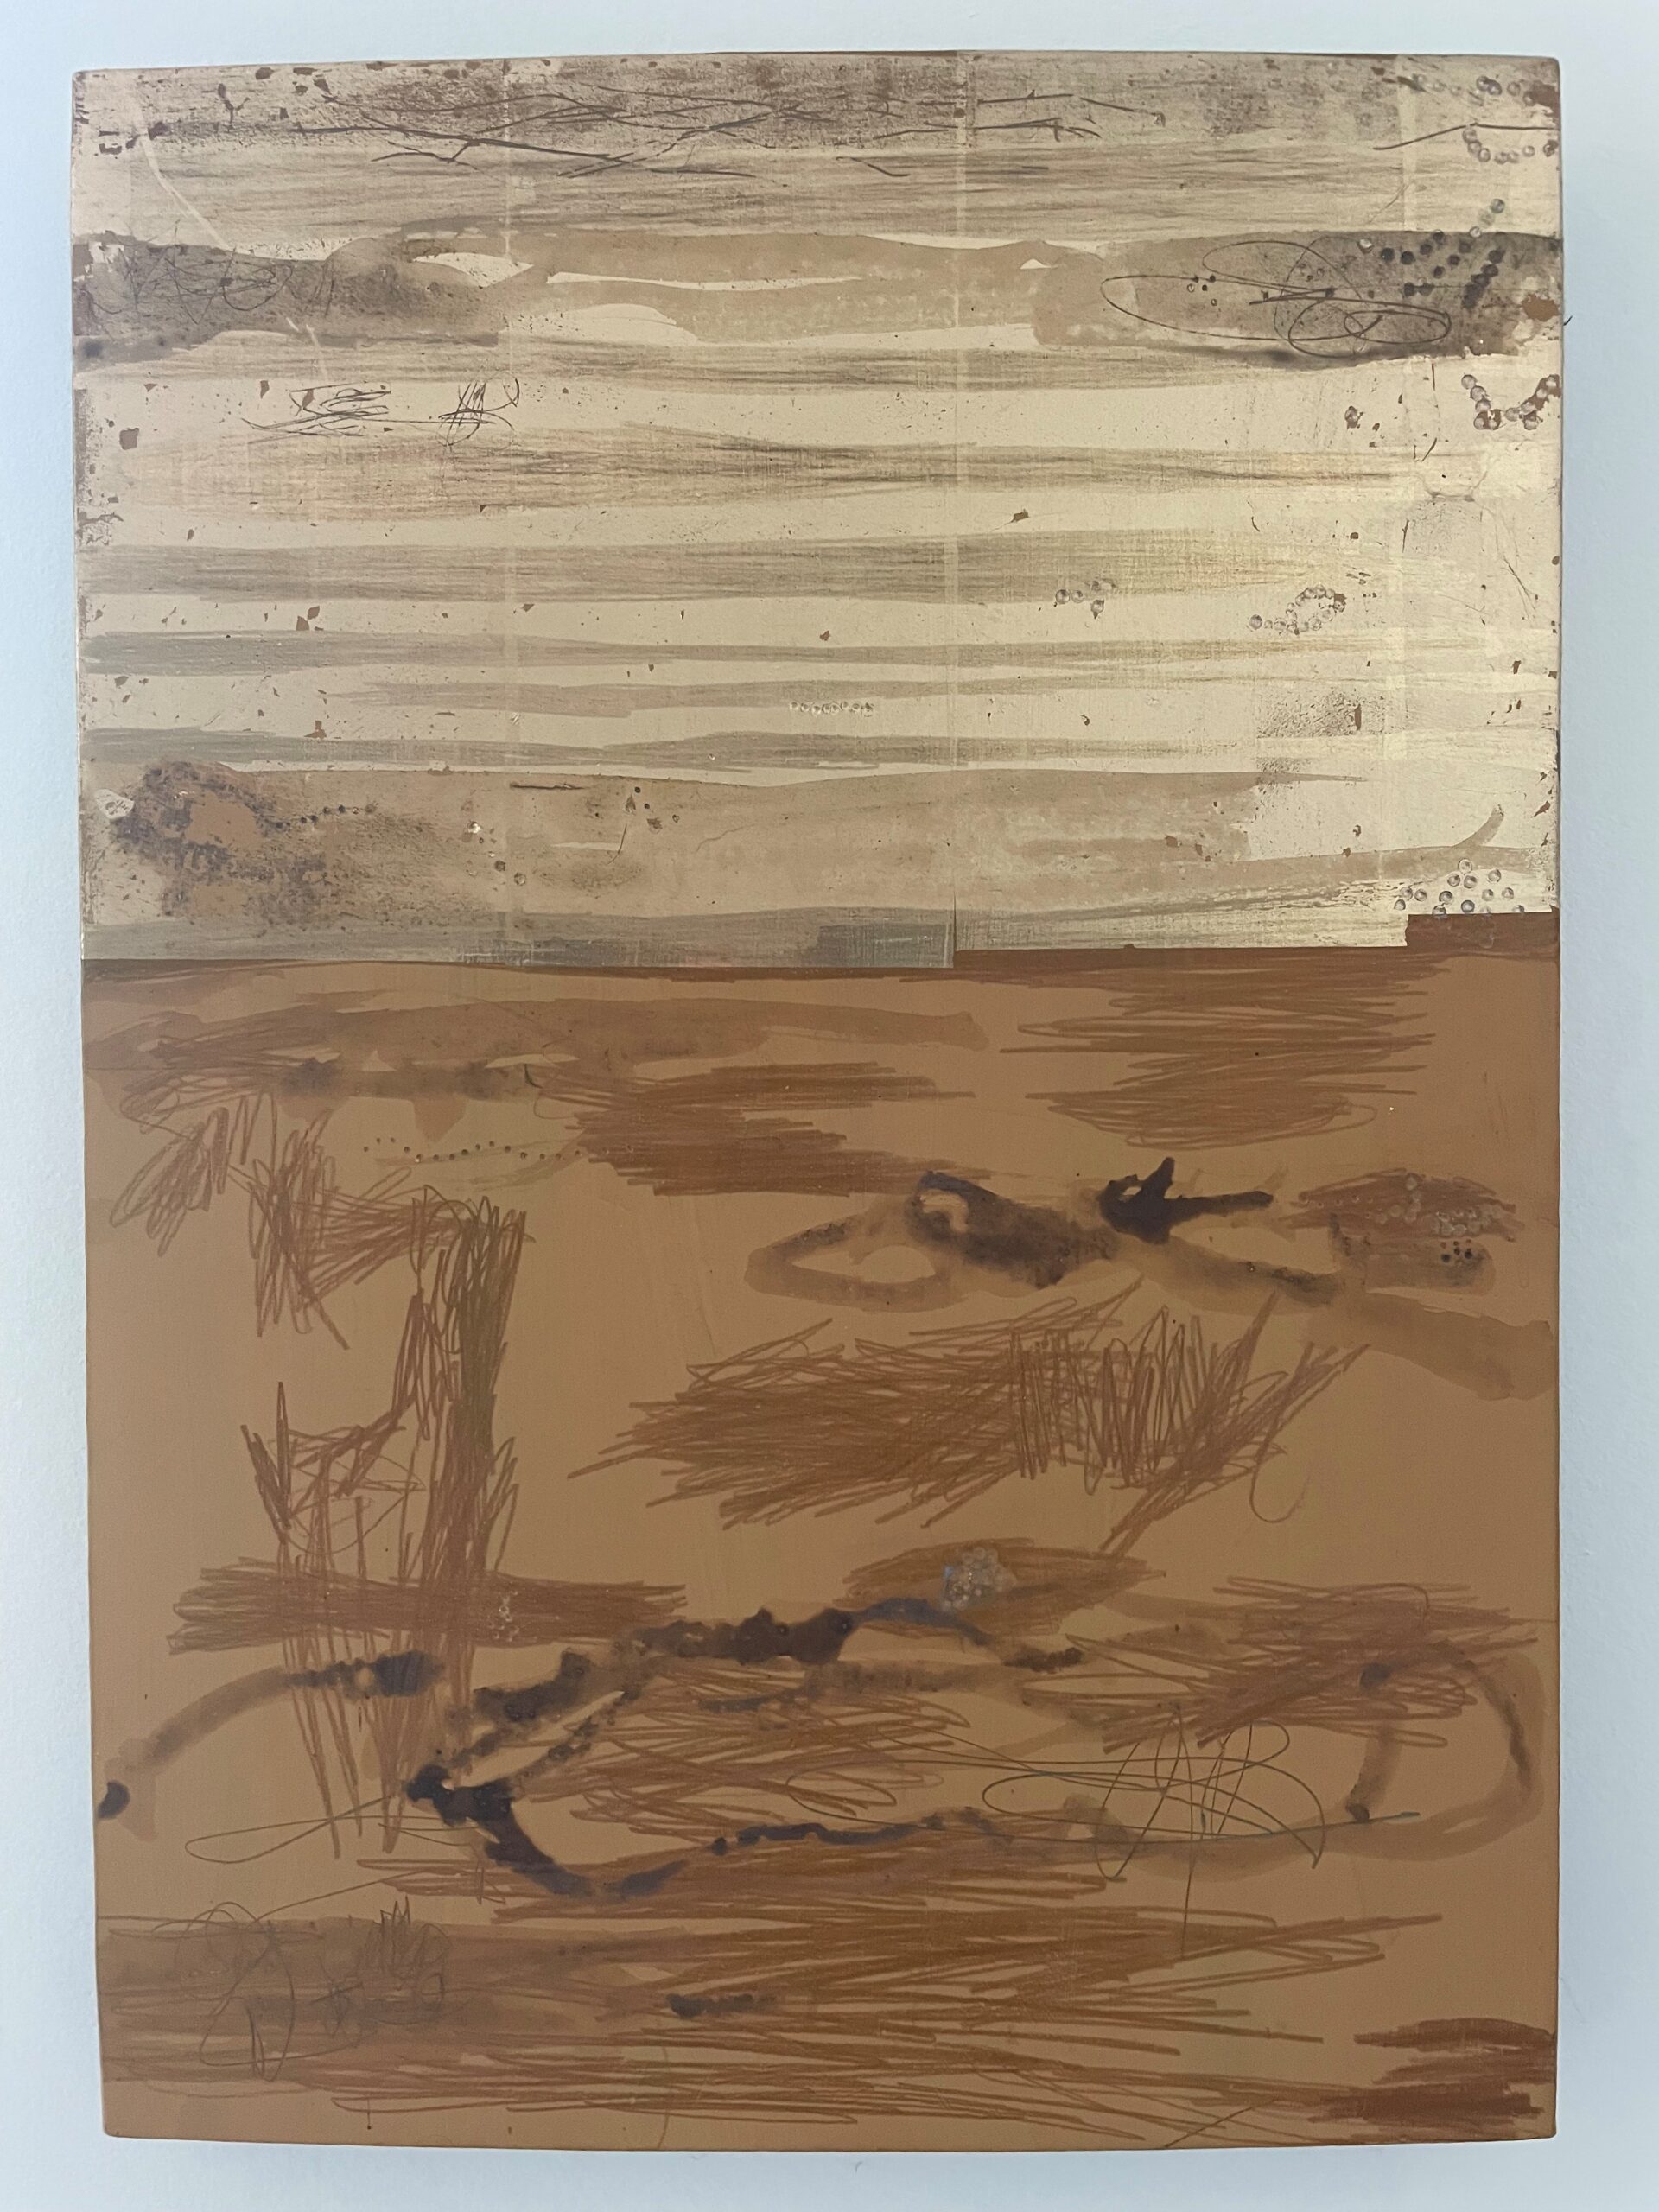 water gilding, panel painting, palladium leaf, punchwork, oak gall ink, natural materials. earth materials, hand made, woodwork, sgraffito, burnish, artist, painter, gilder, expression, contemporary artist, mixed mediums, reflection, reticulation